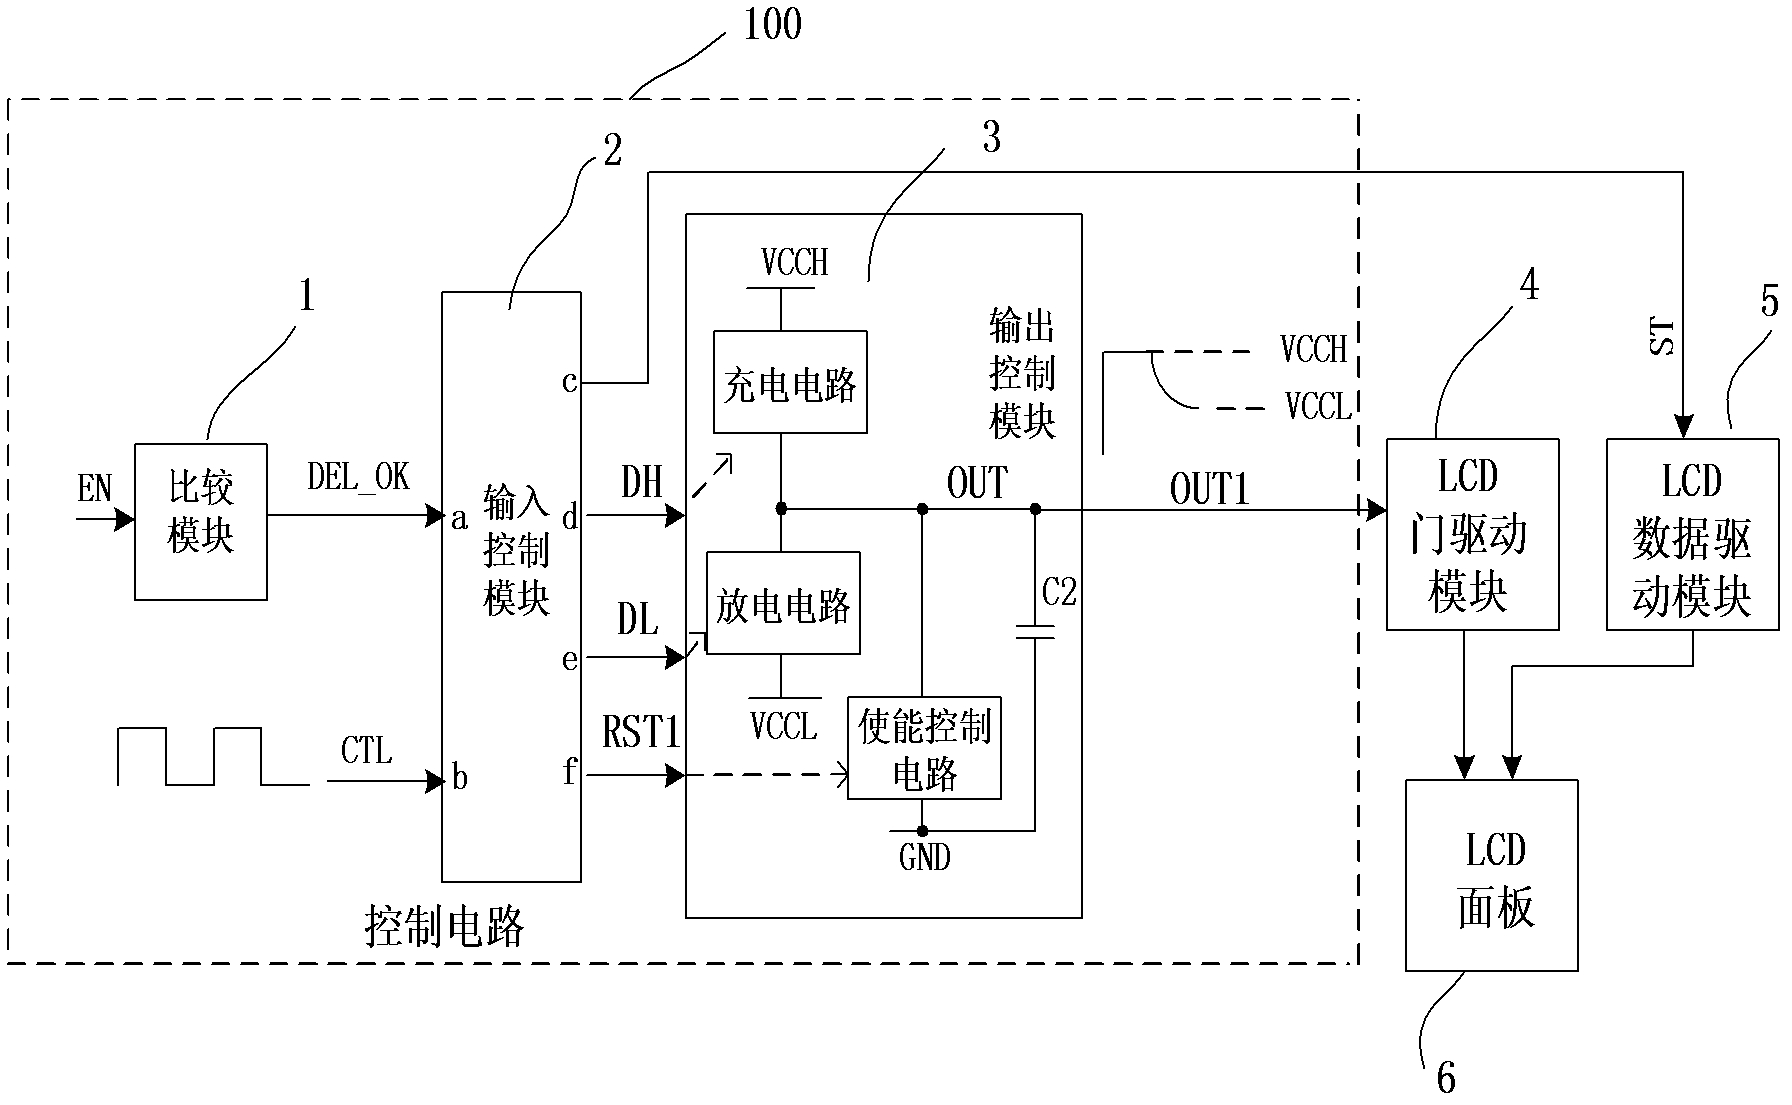 Control circuit for eliminating glittering and shutdown ghosting phenomena of thin film field effect transistor